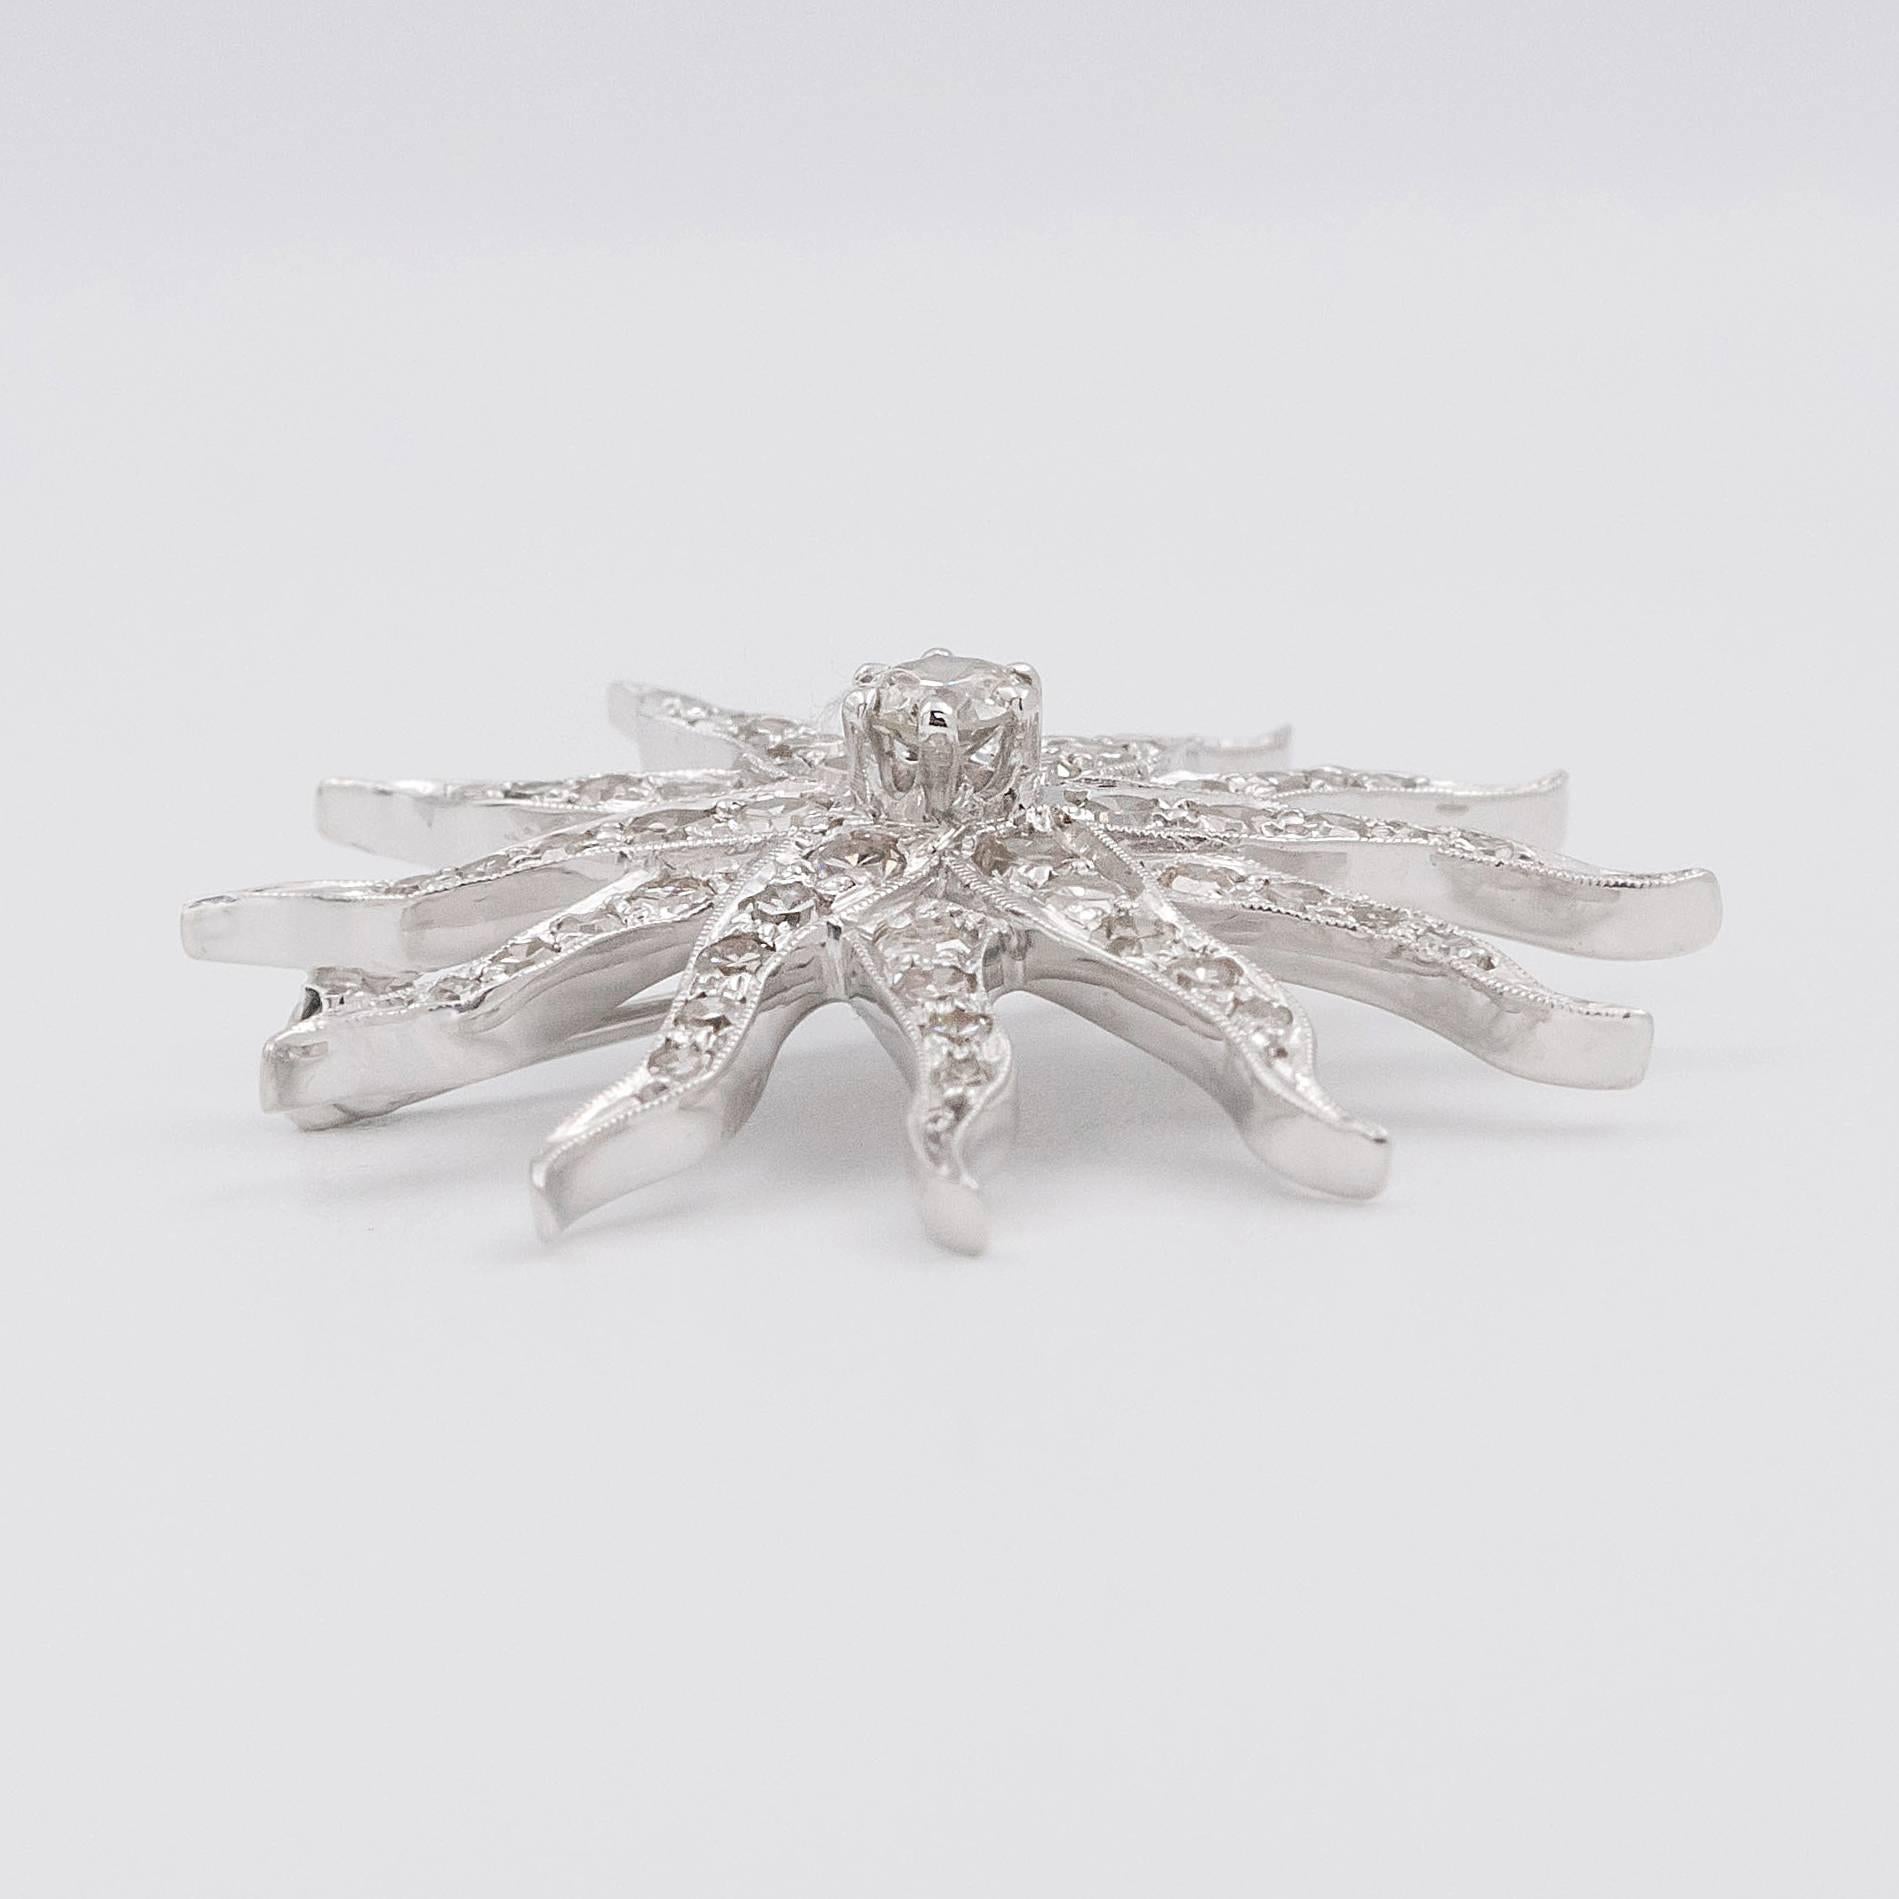 A dazzling Belle Epoque Diamond set Sunburst Brooch. This white over Yellow Gold Sunburst is set with 55 Diamonds graduating in size from 1.25mm to 3.45mm totalling 1.10 carat by gauge and formula. The brooch is 14K white gold with good dimension